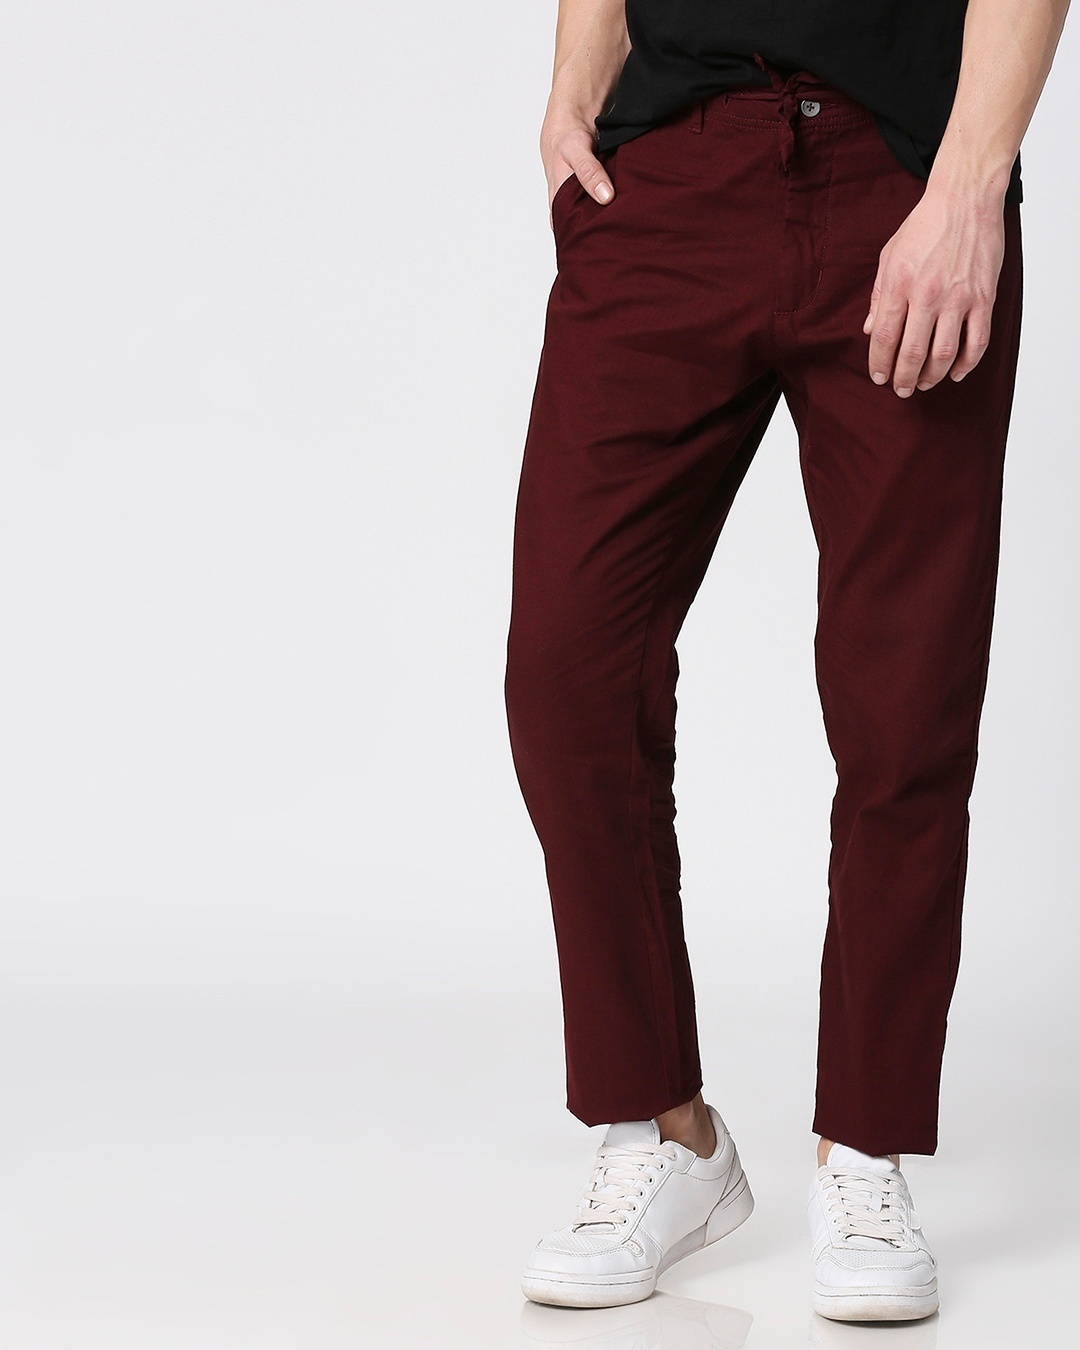 Buy Wine Red Casual Cotton Pants Men maroon Online at